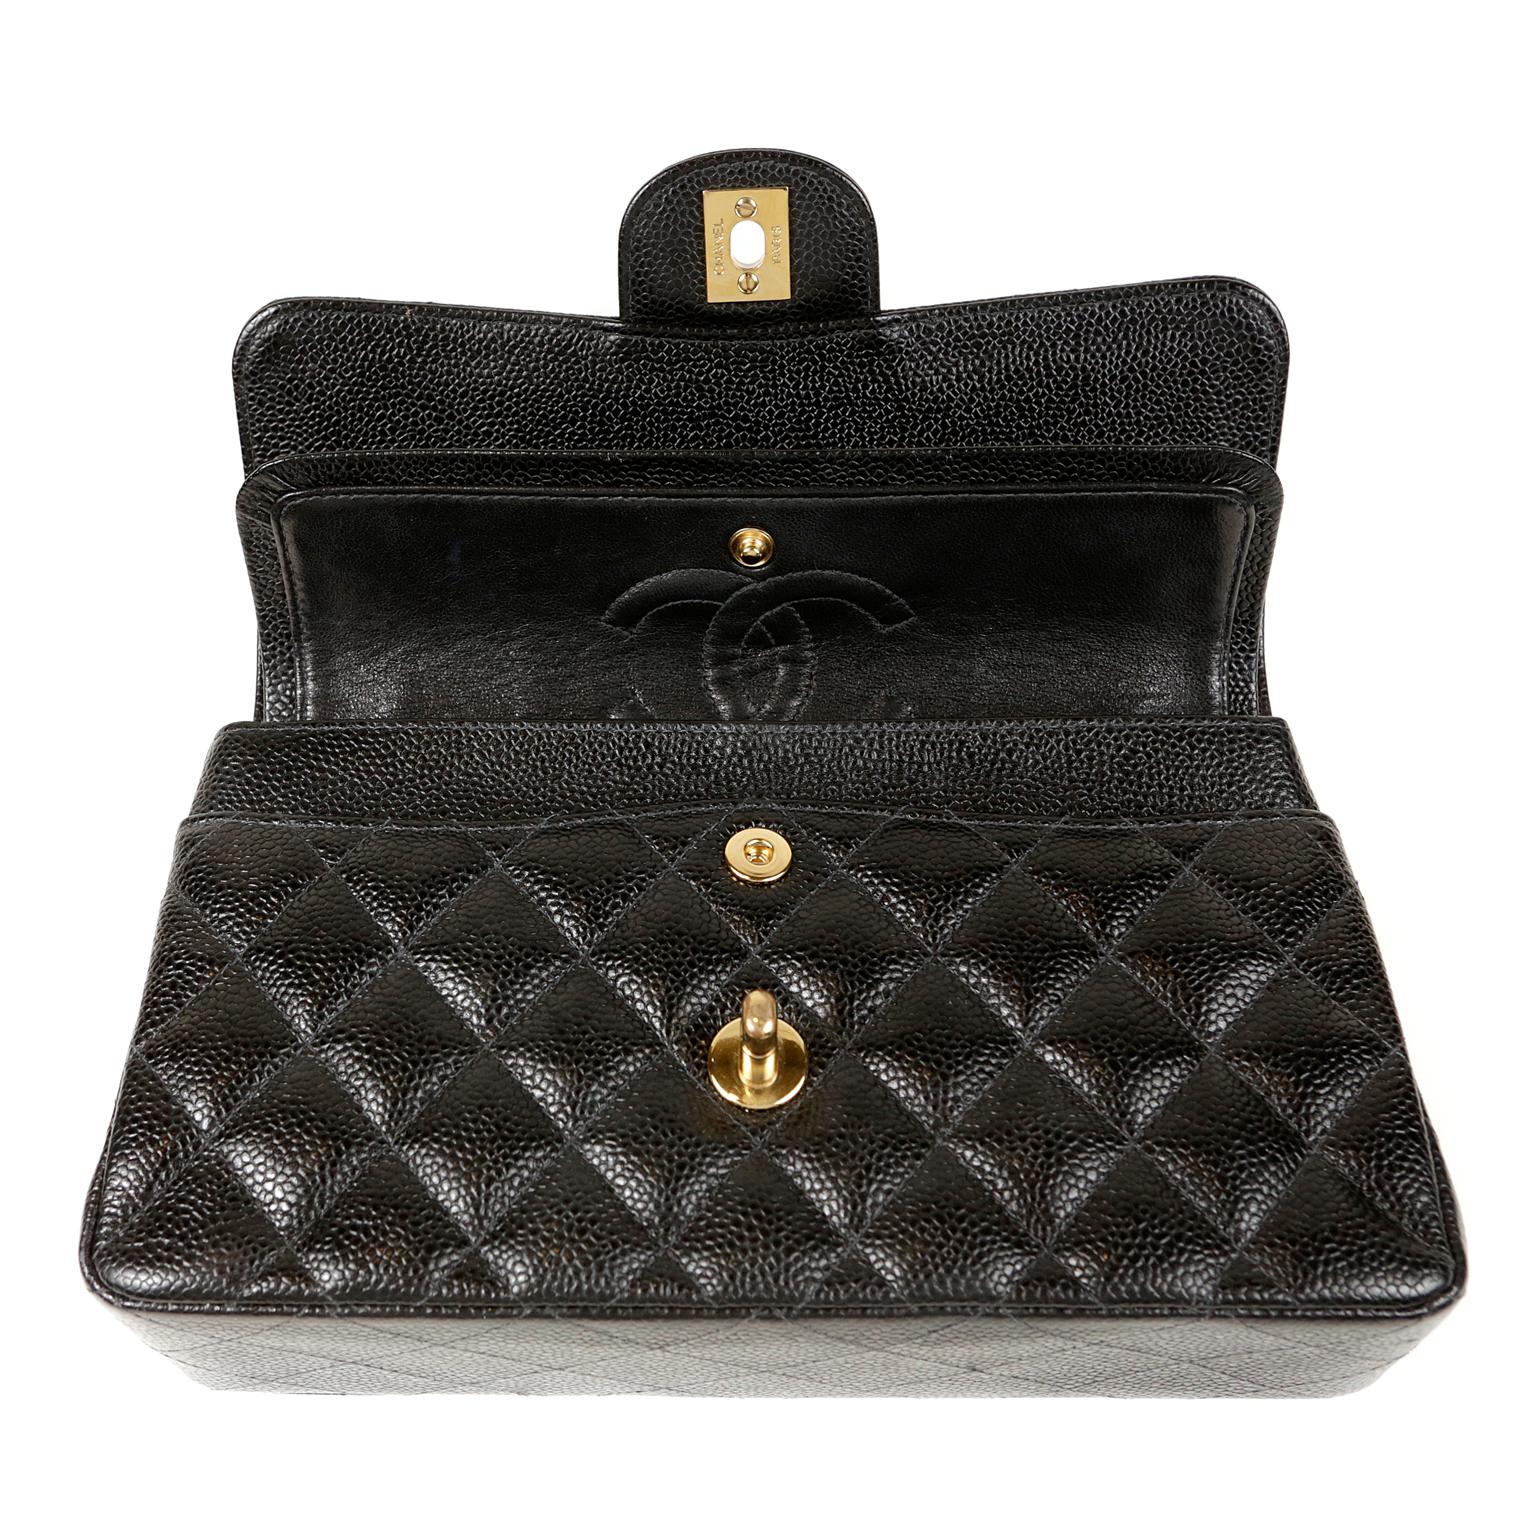 Chanel Black Caviar Small Classic Double Flap Bag with Gold Hardware 3